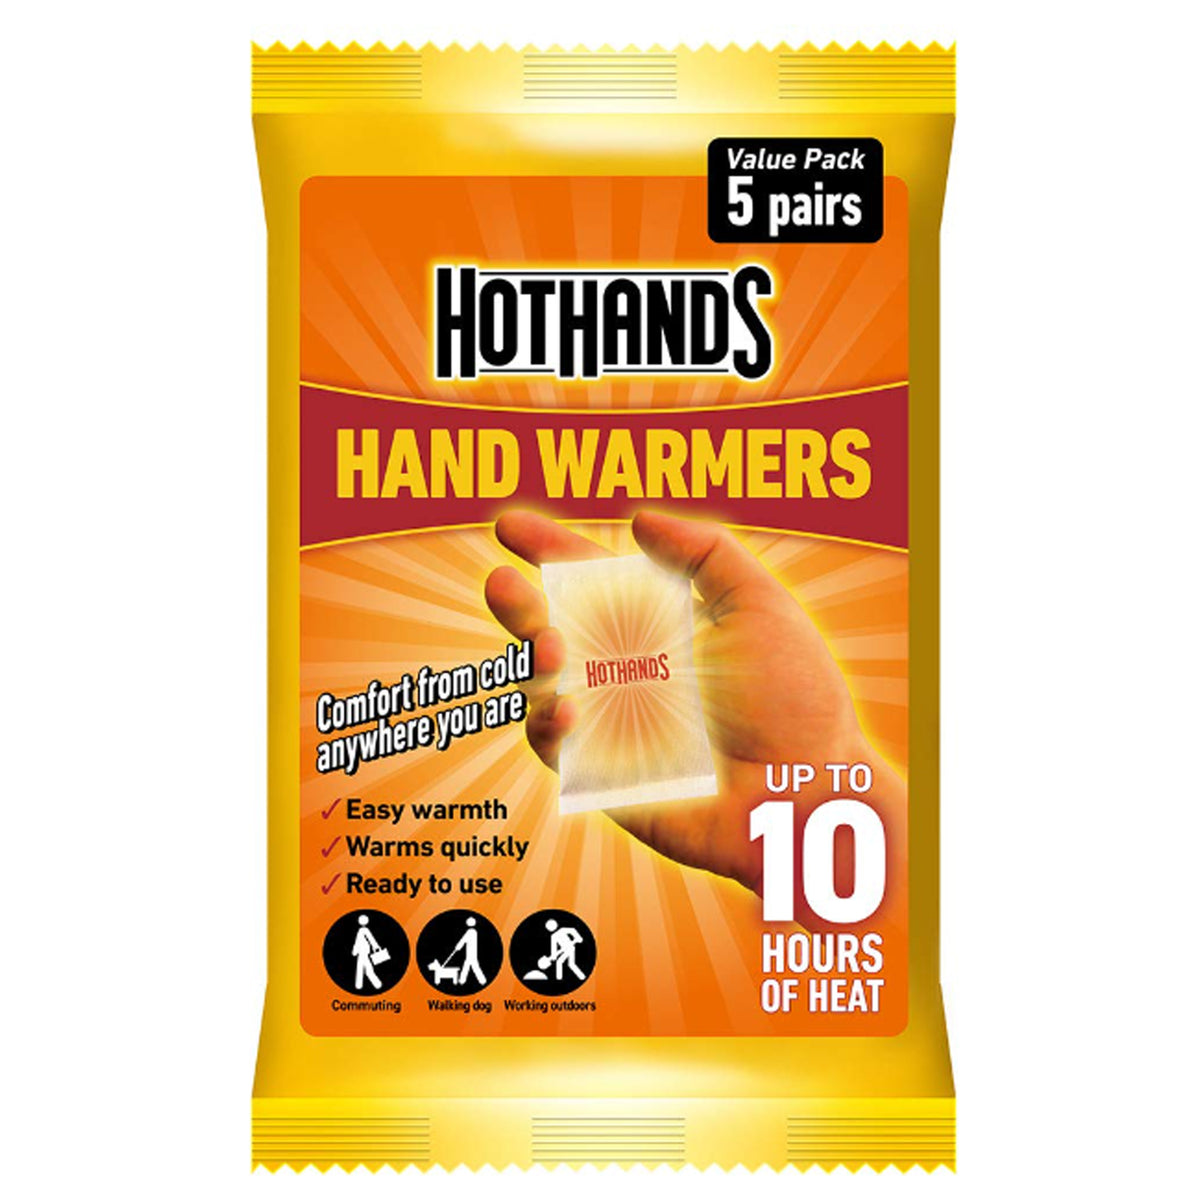 HotHands Hand Warmers - Pack of 5 Pairs